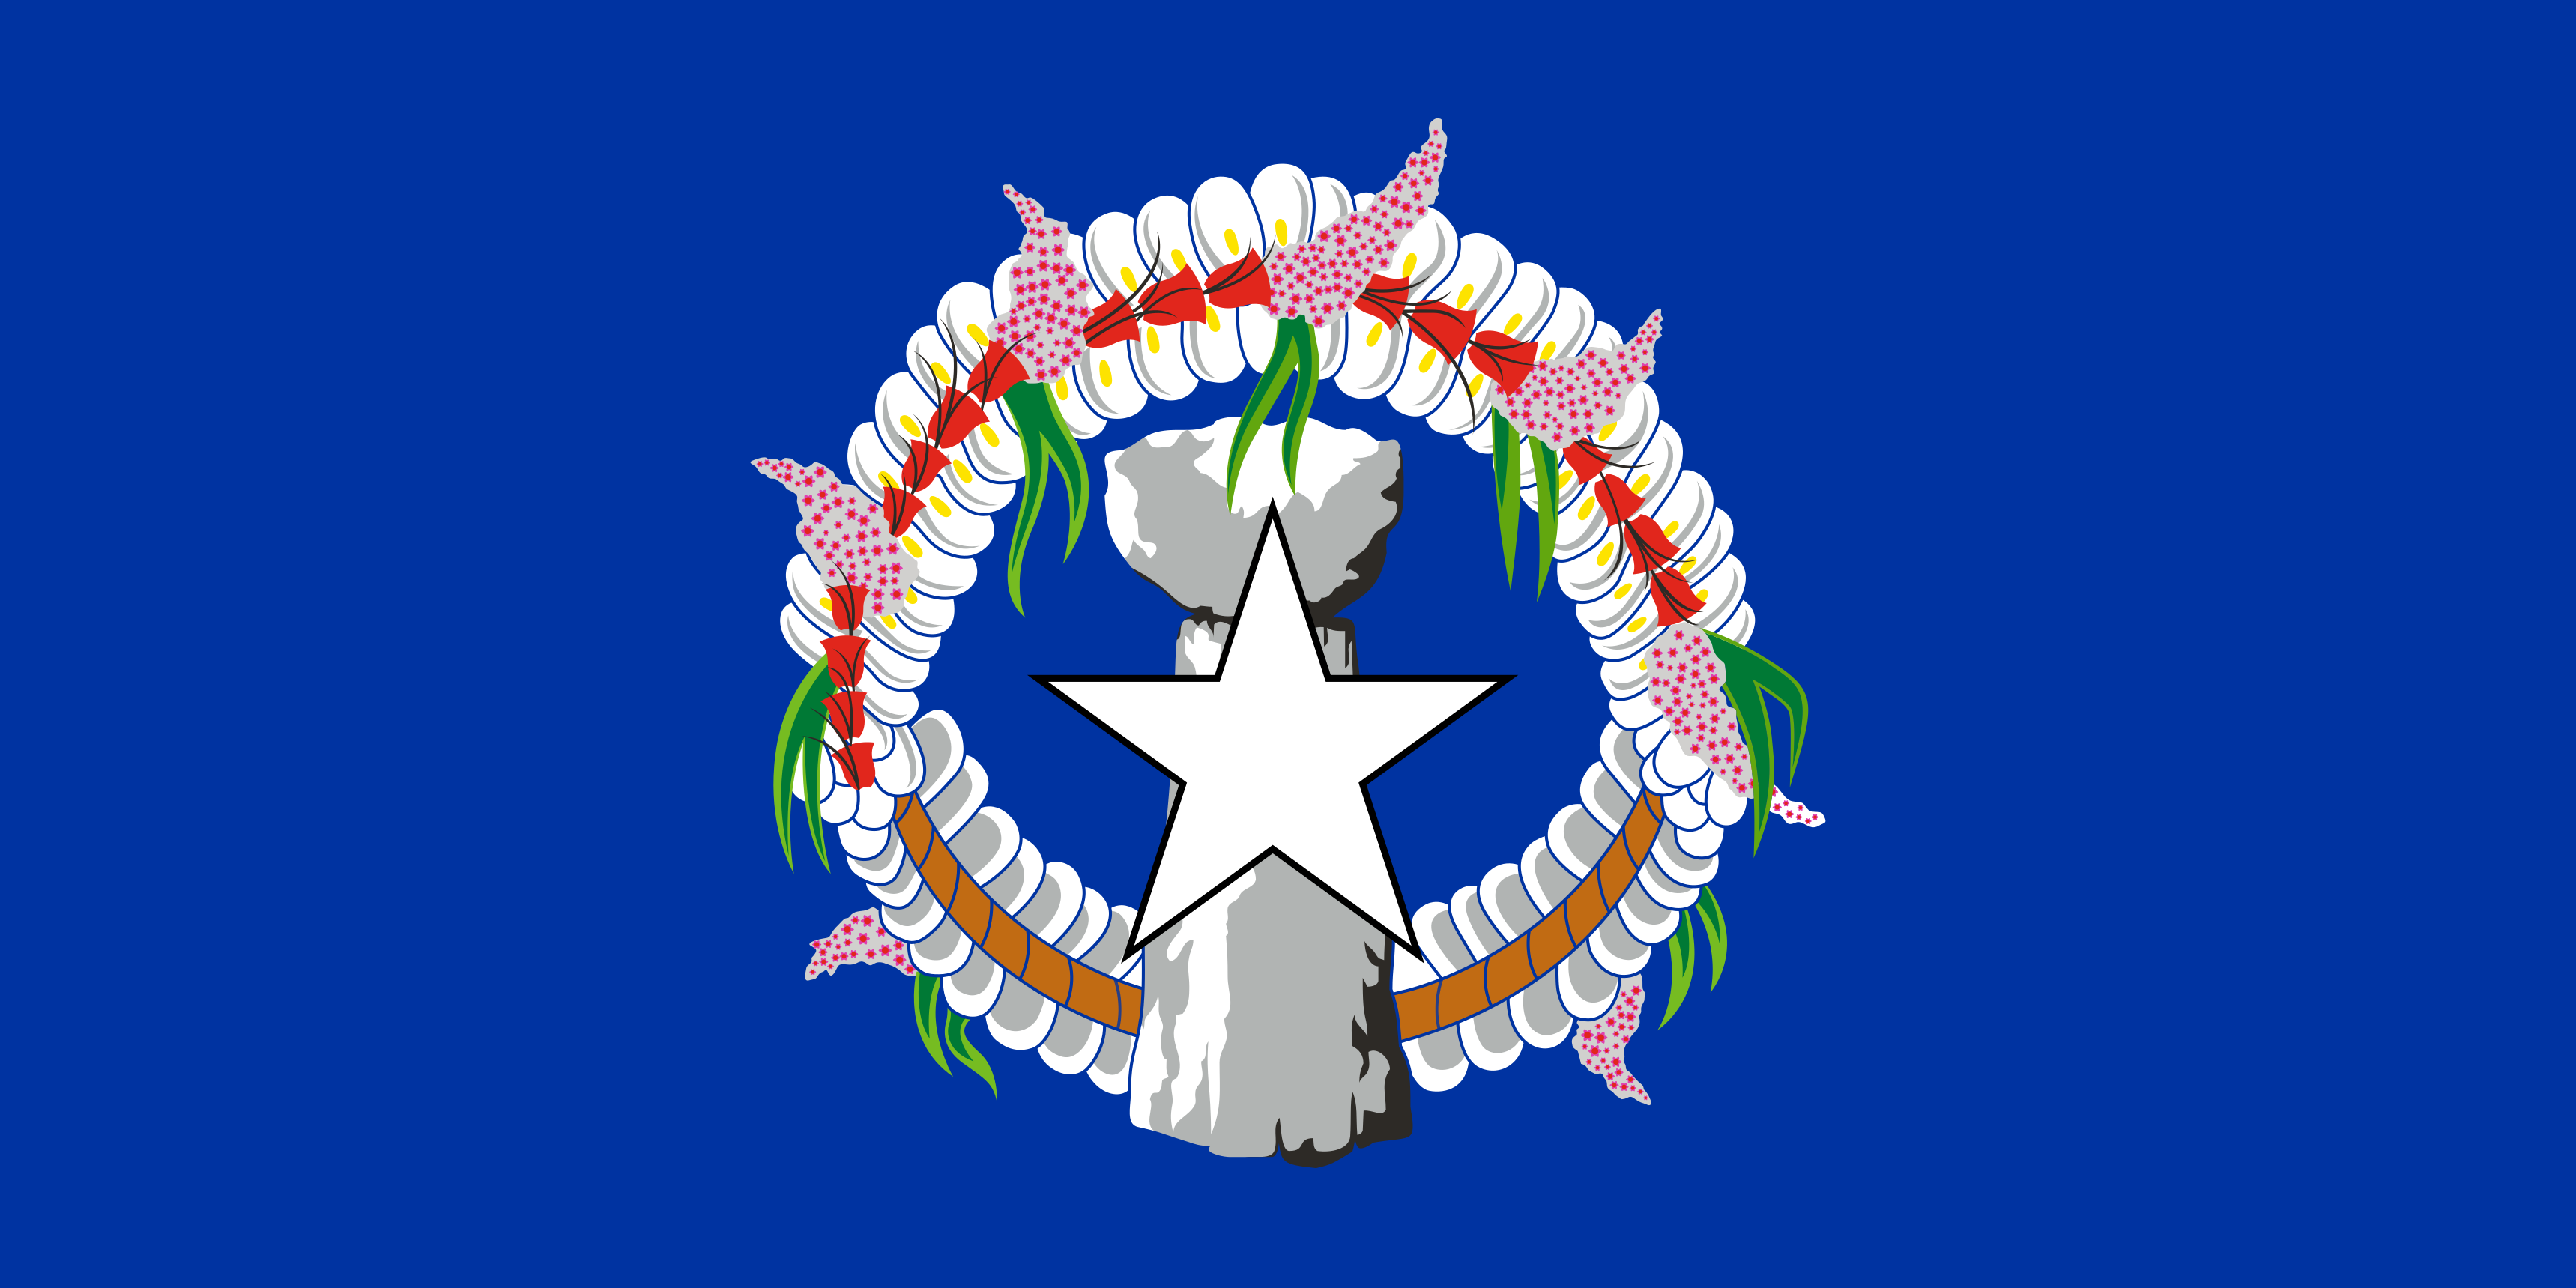 The Northern Mariana Islands Flag Image - Free Download